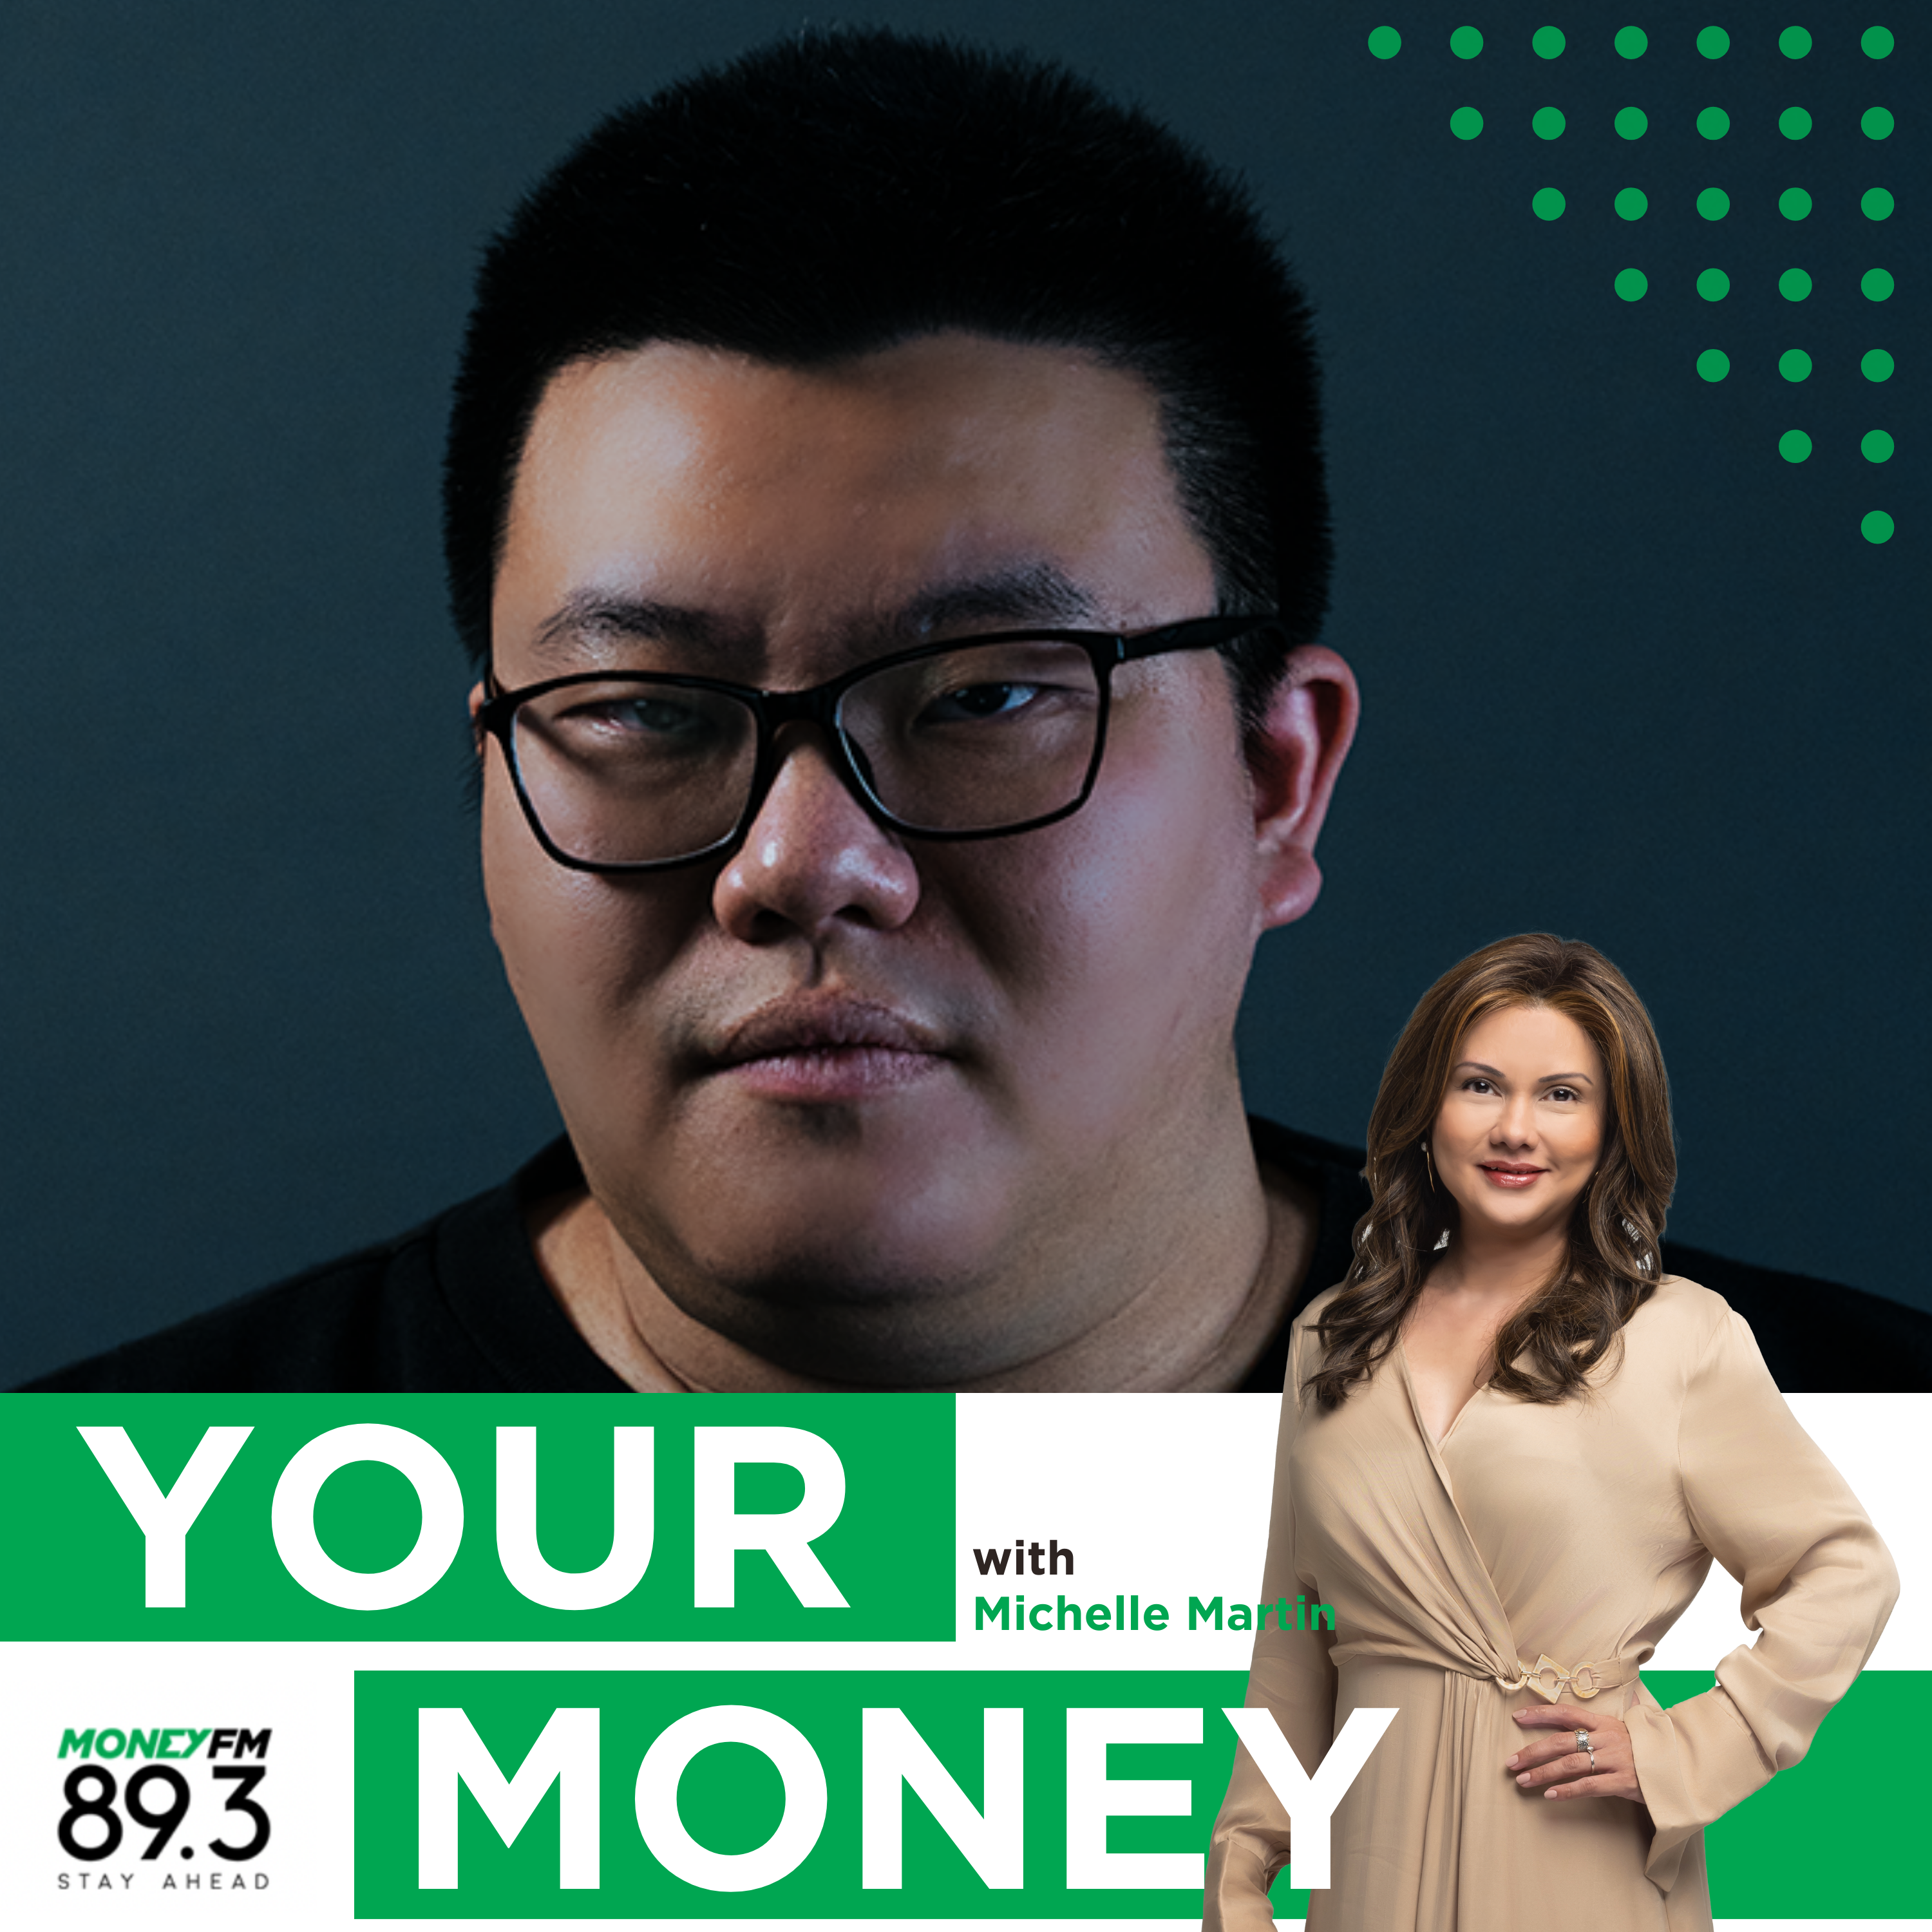 Money and Me: Novelship has raised close to 20 Million USD, so what's next for this Singapore start-up?